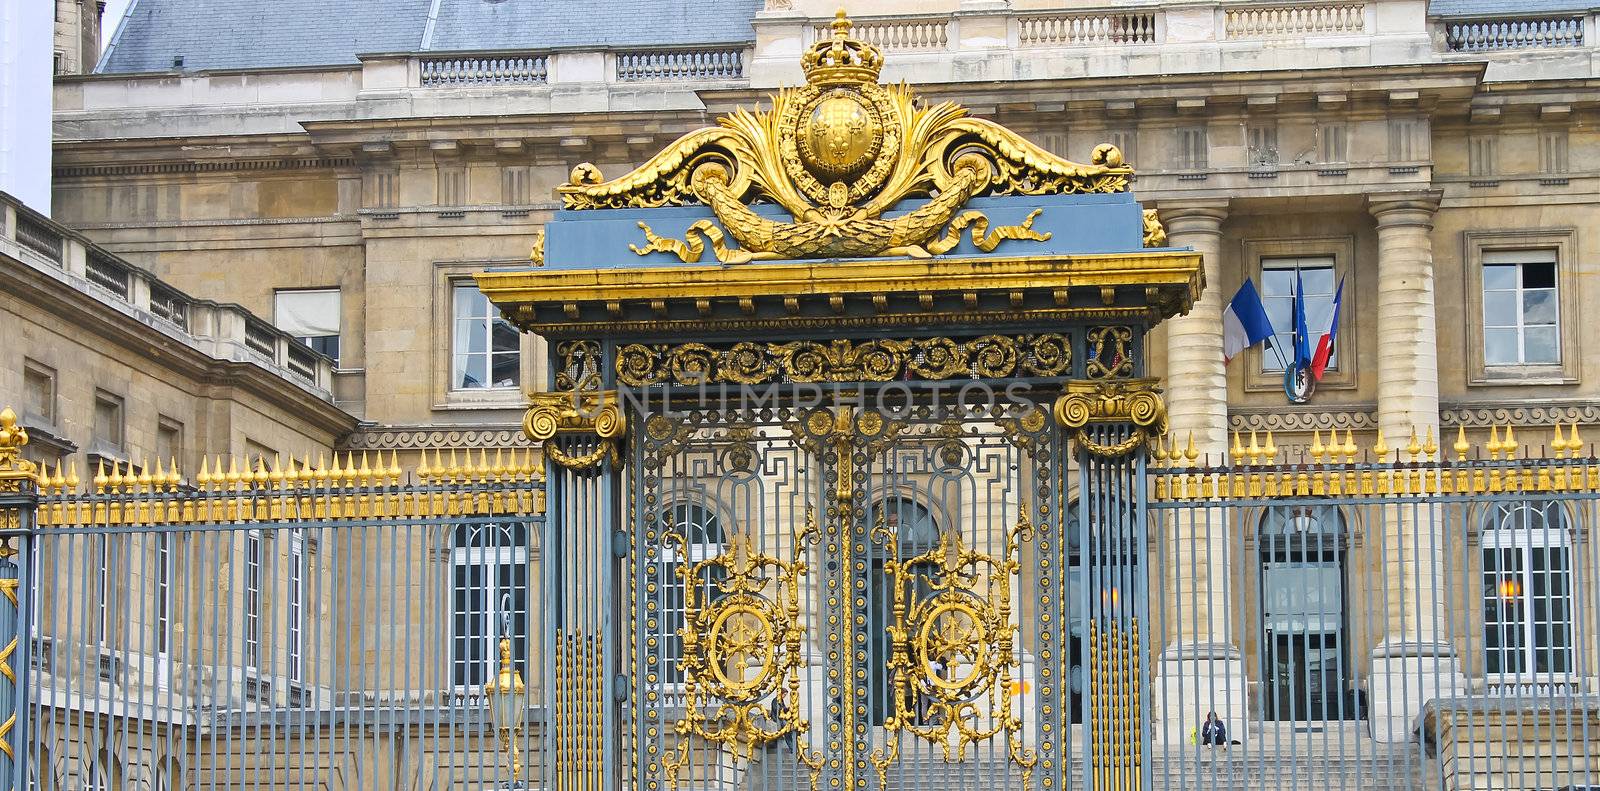 Gates of the palace of justice in Paris. France by NickNick